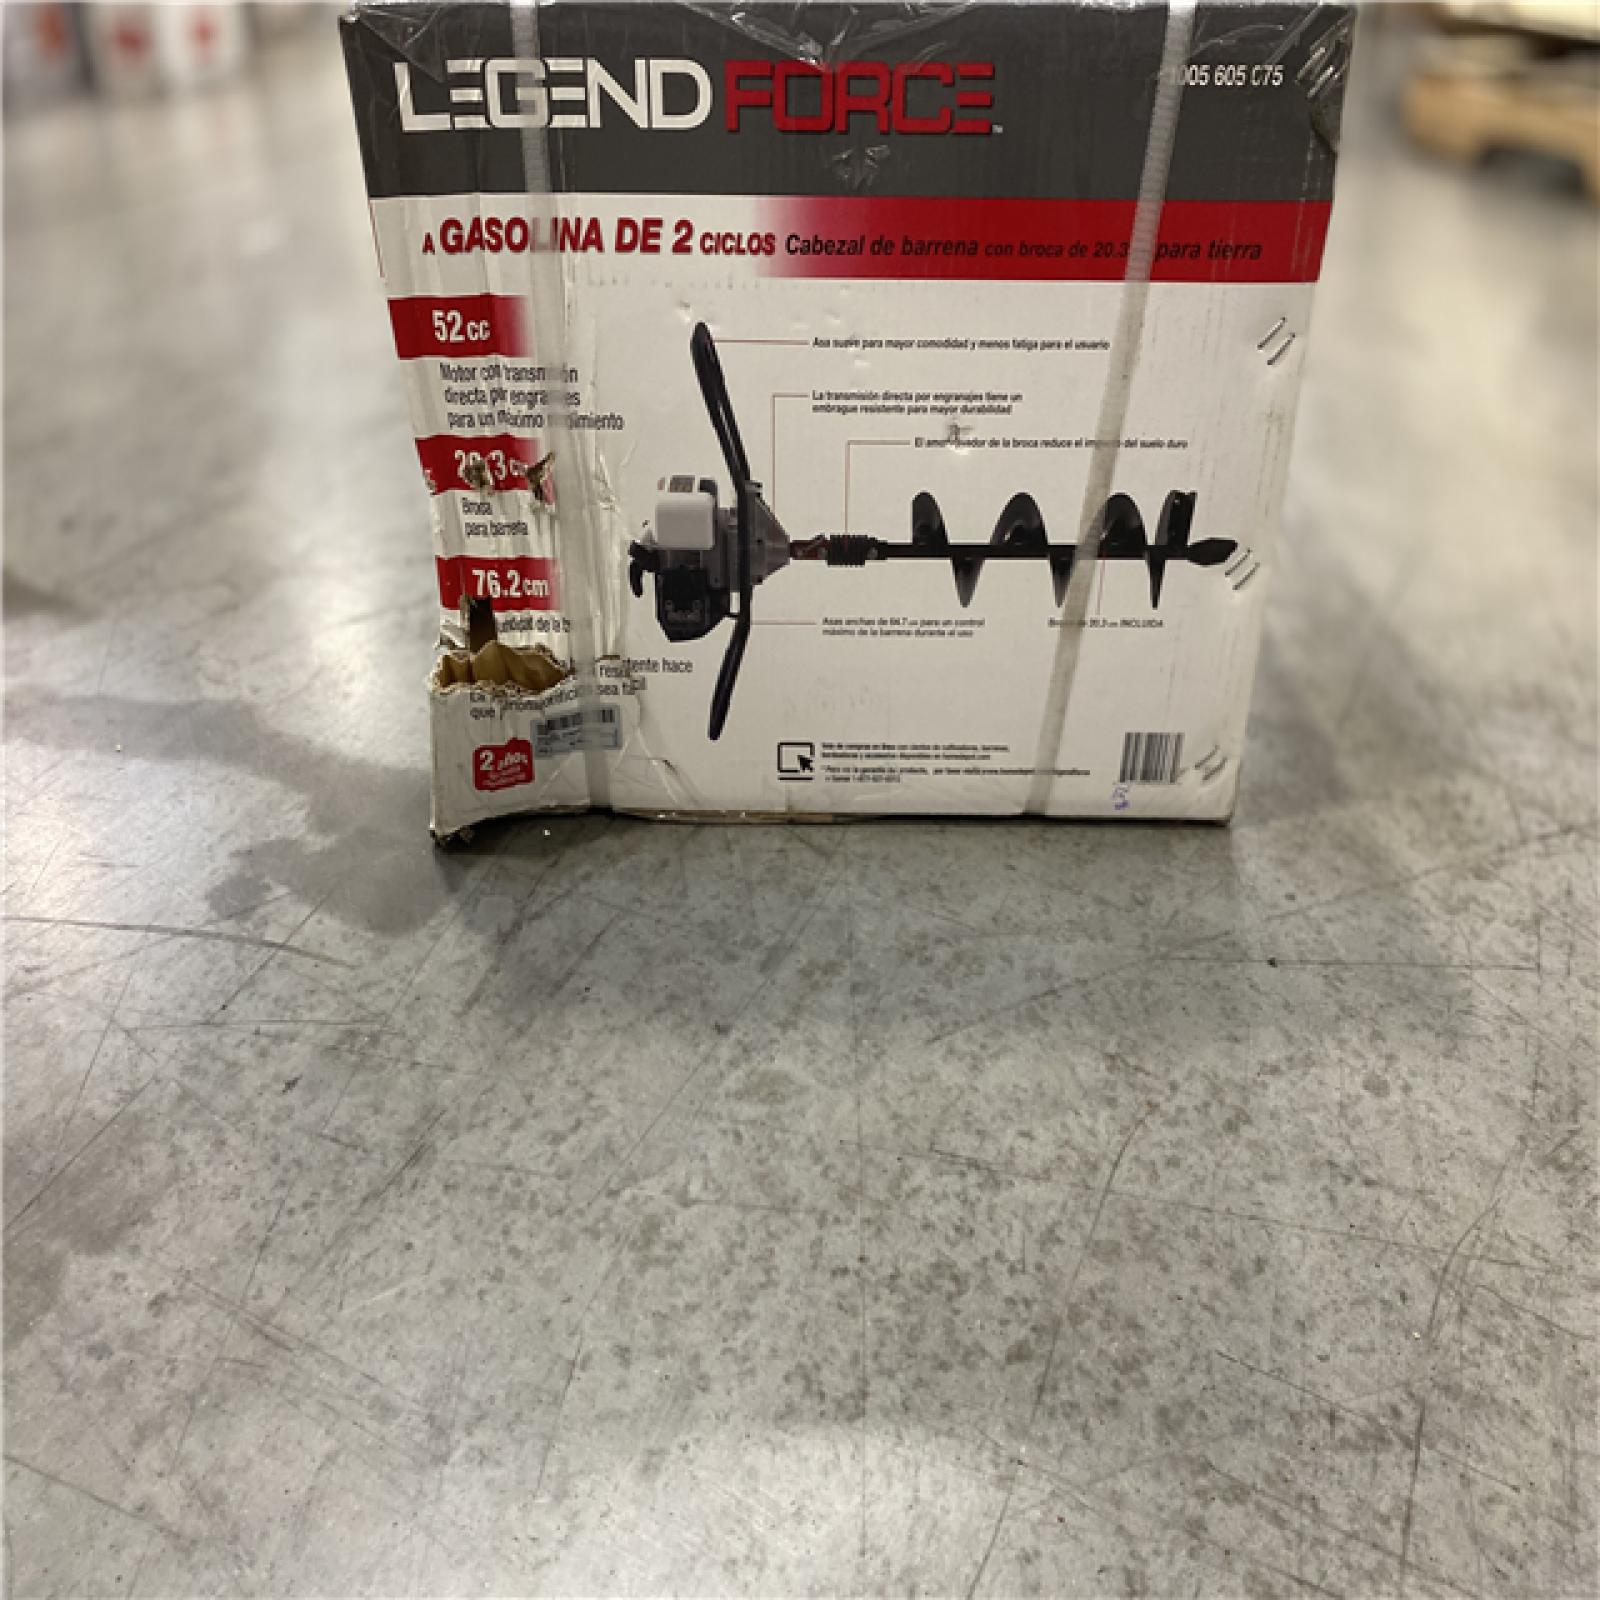 NEW! - Legend Force 52 cc 2-Cycle Gas Powered 1-Man Earth Auger with 8 in. Bit